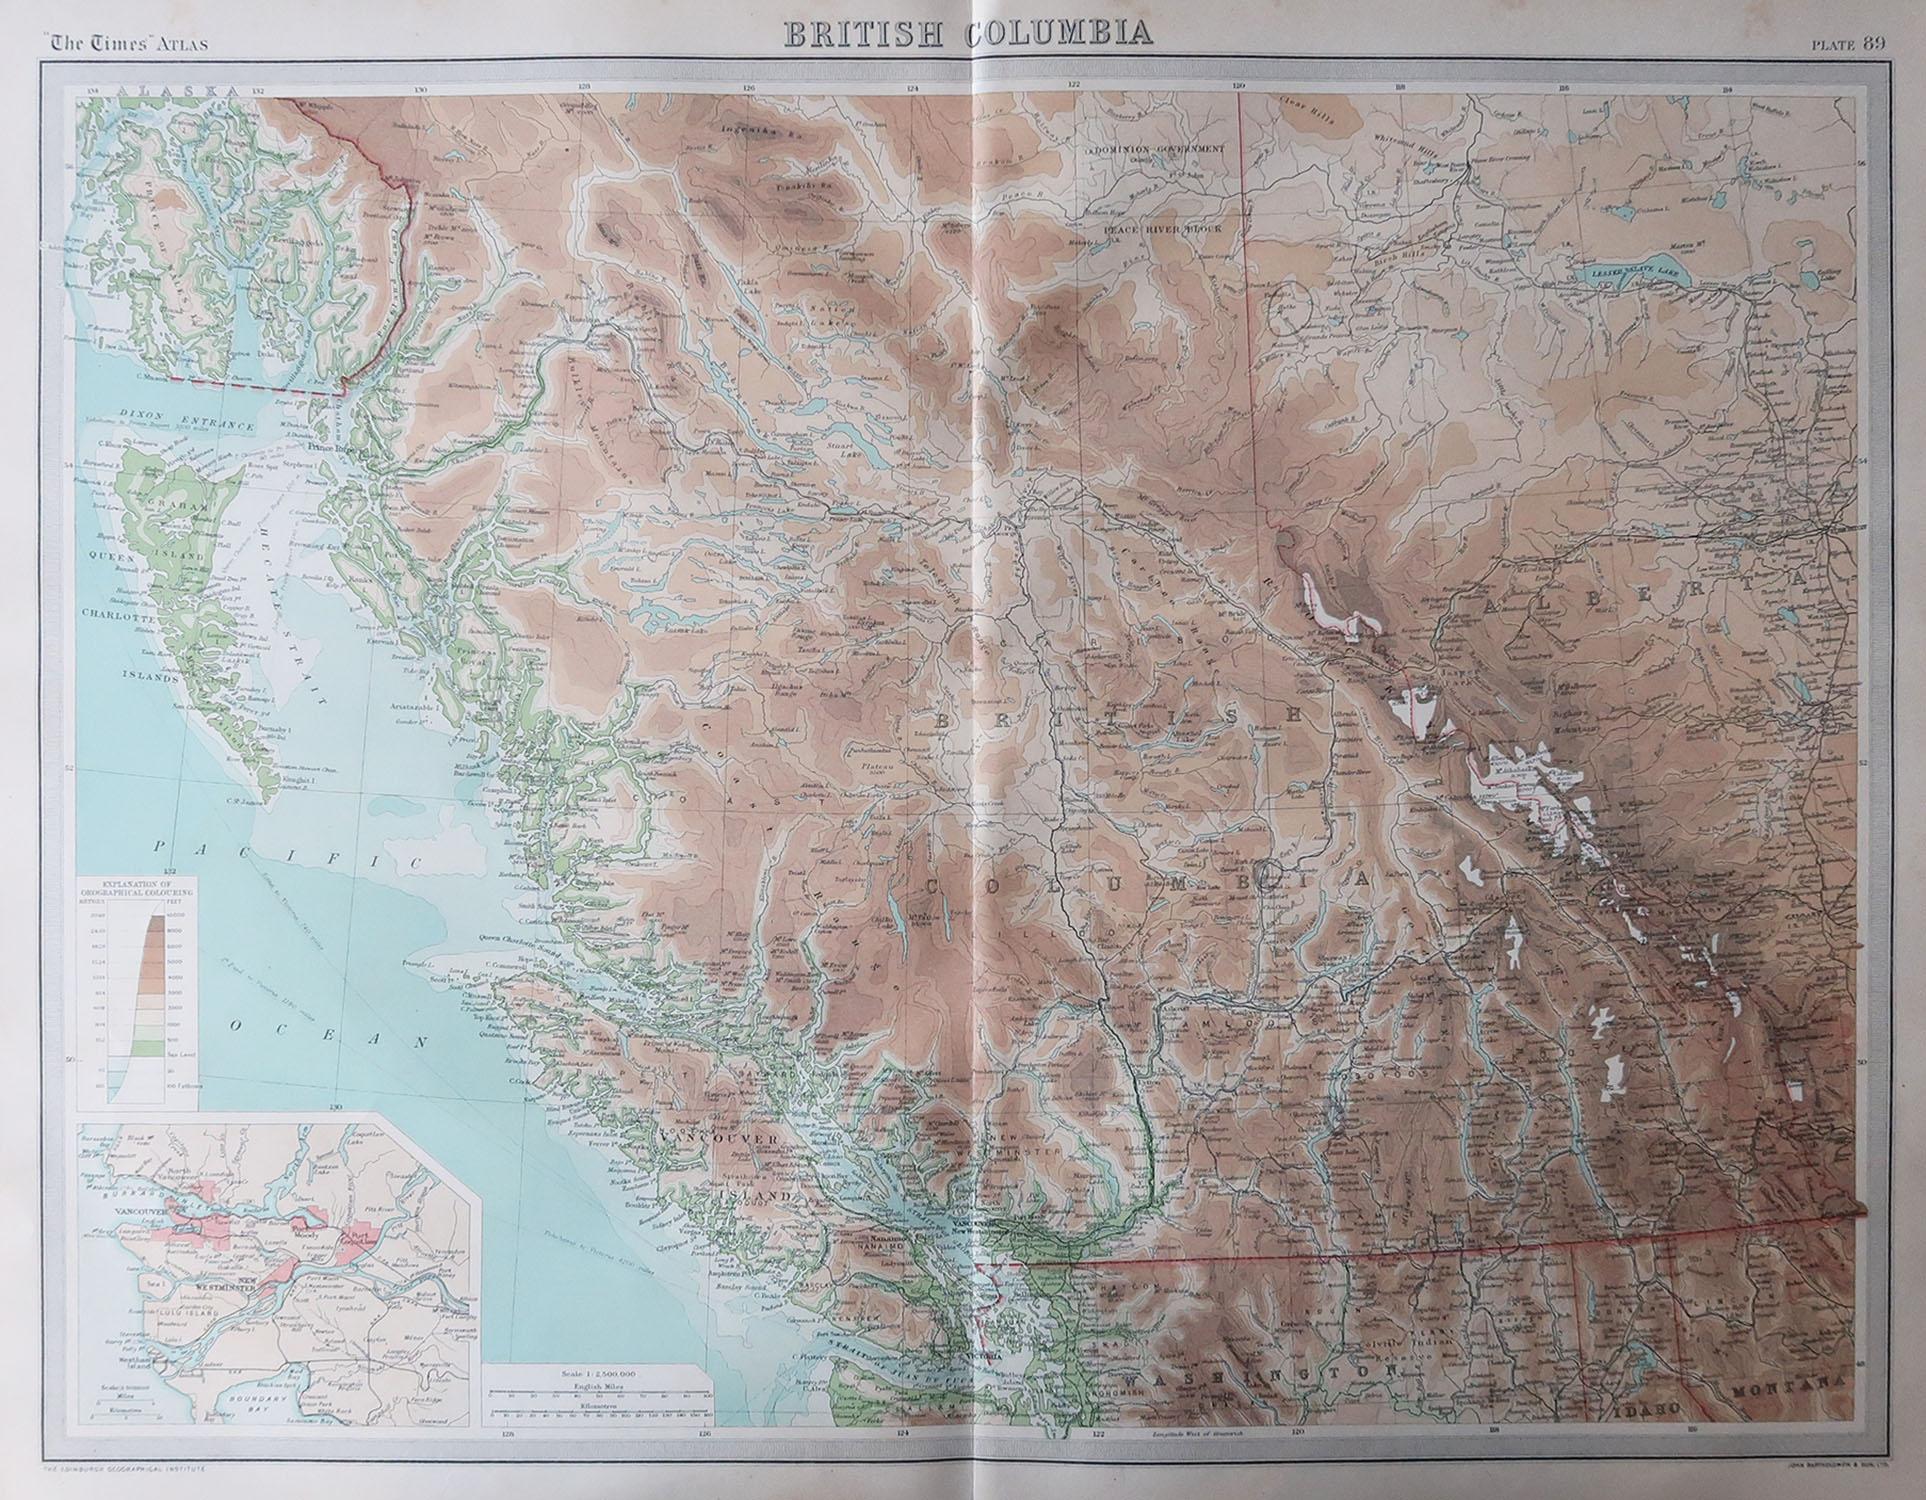 Great map of British Columbia

Unframed

Original color

By John Bartholomew and Co. Edinburgh Geographical Institute

Published, circa 1920

Free shipping.
 